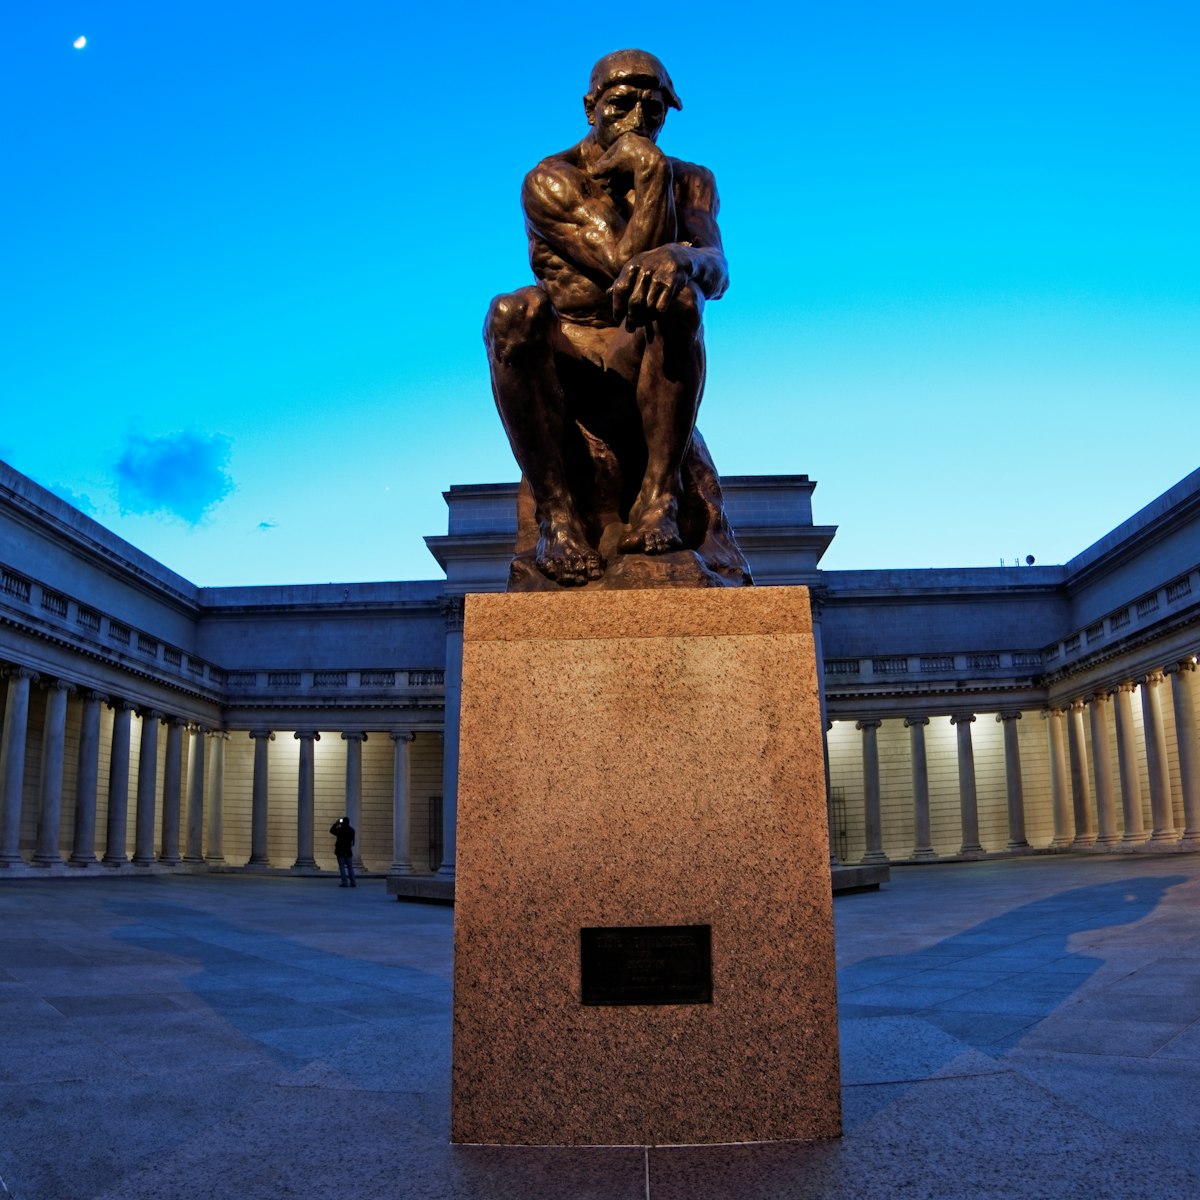 Statue of the Thinker installed at the front of the courtyard at the Palace of the Legion of Honor in San Francisco